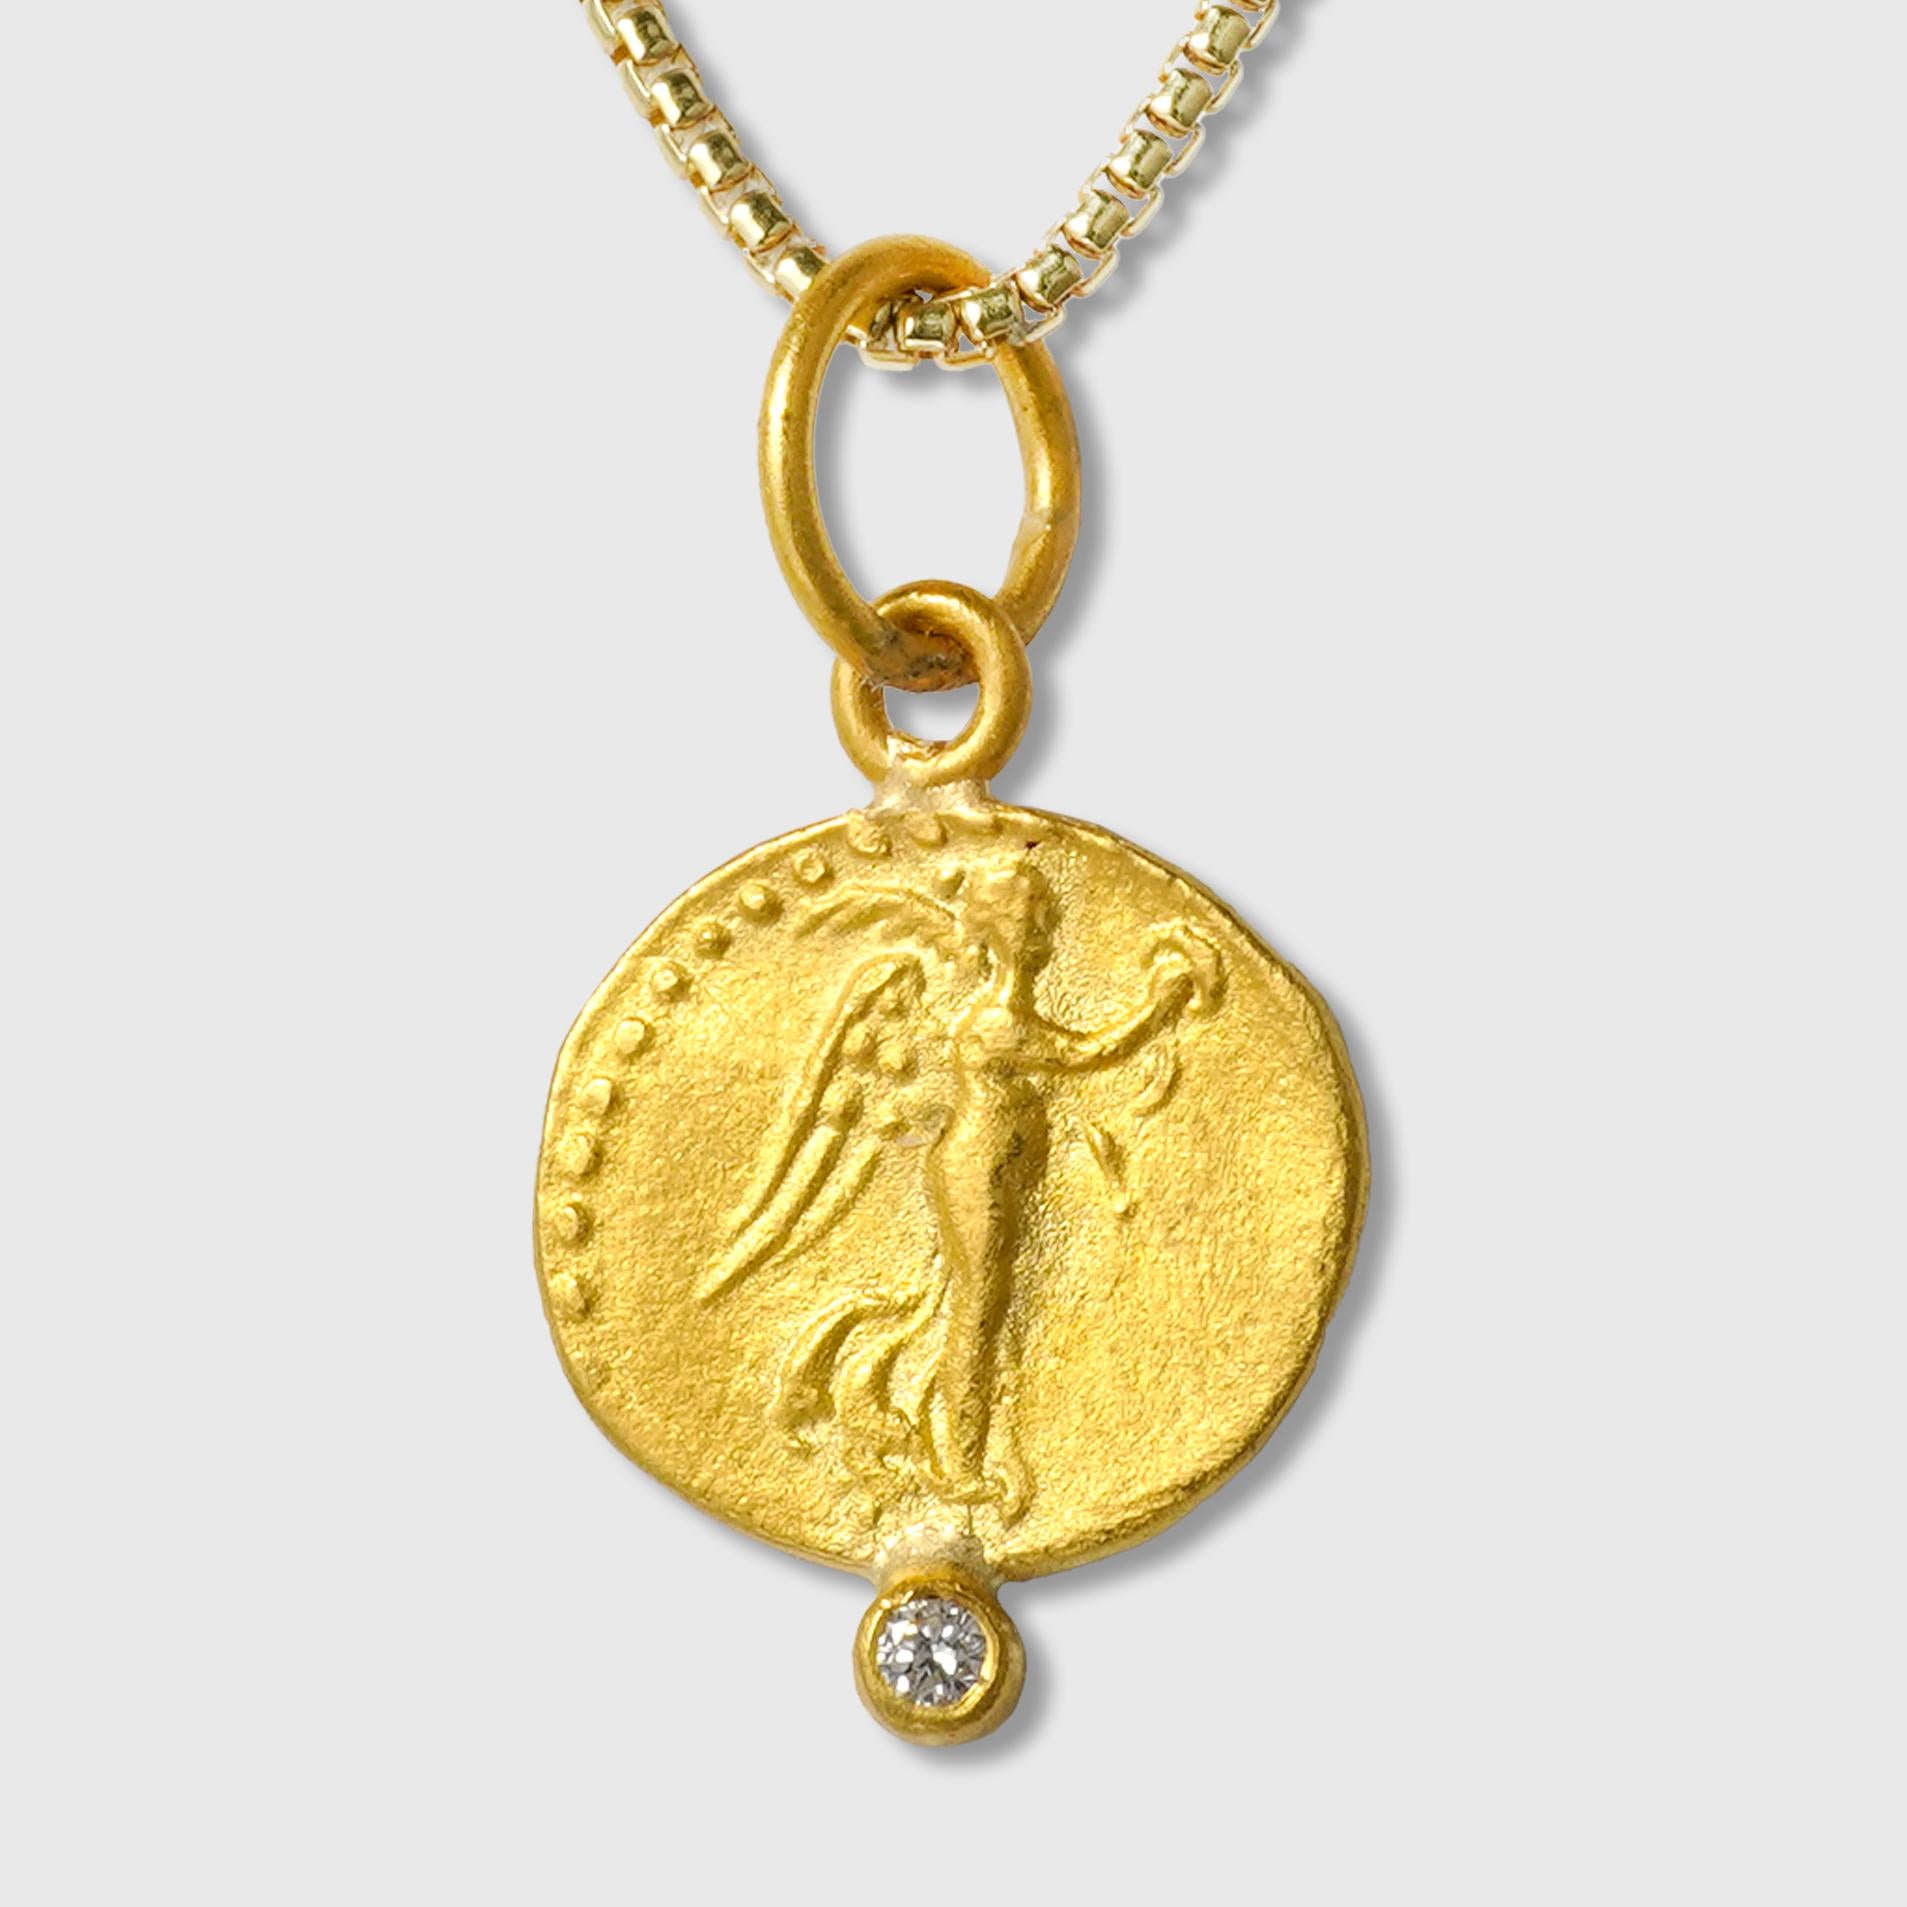 Ancient, Nike Charm Coin (Sterling Replica) Pendant with 0.02ct Diamond, 24kt Solid Gold, comes with 16